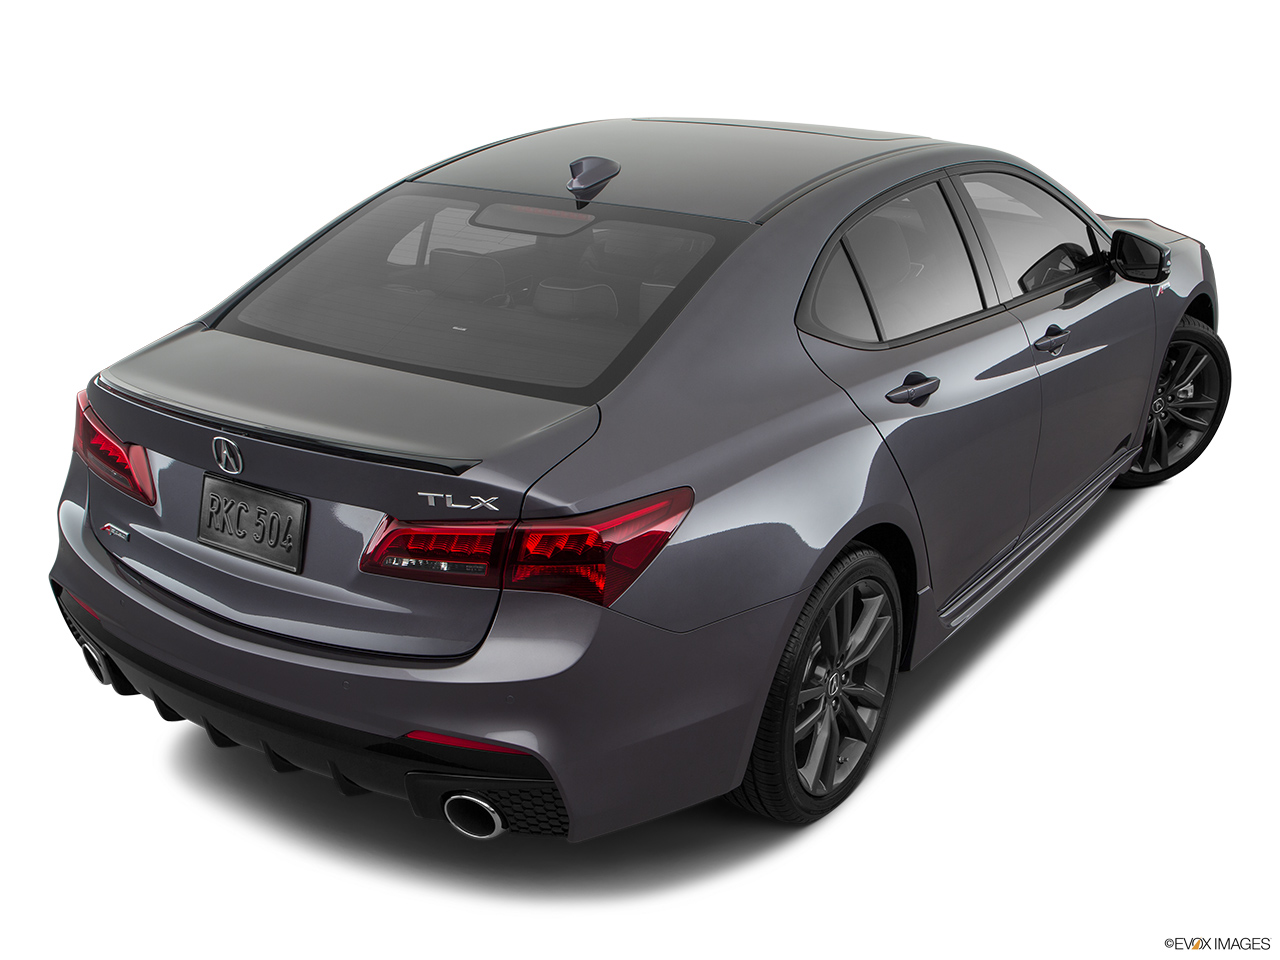 2019 Acura TLX 3.5L Rear 3/4 angle view. 